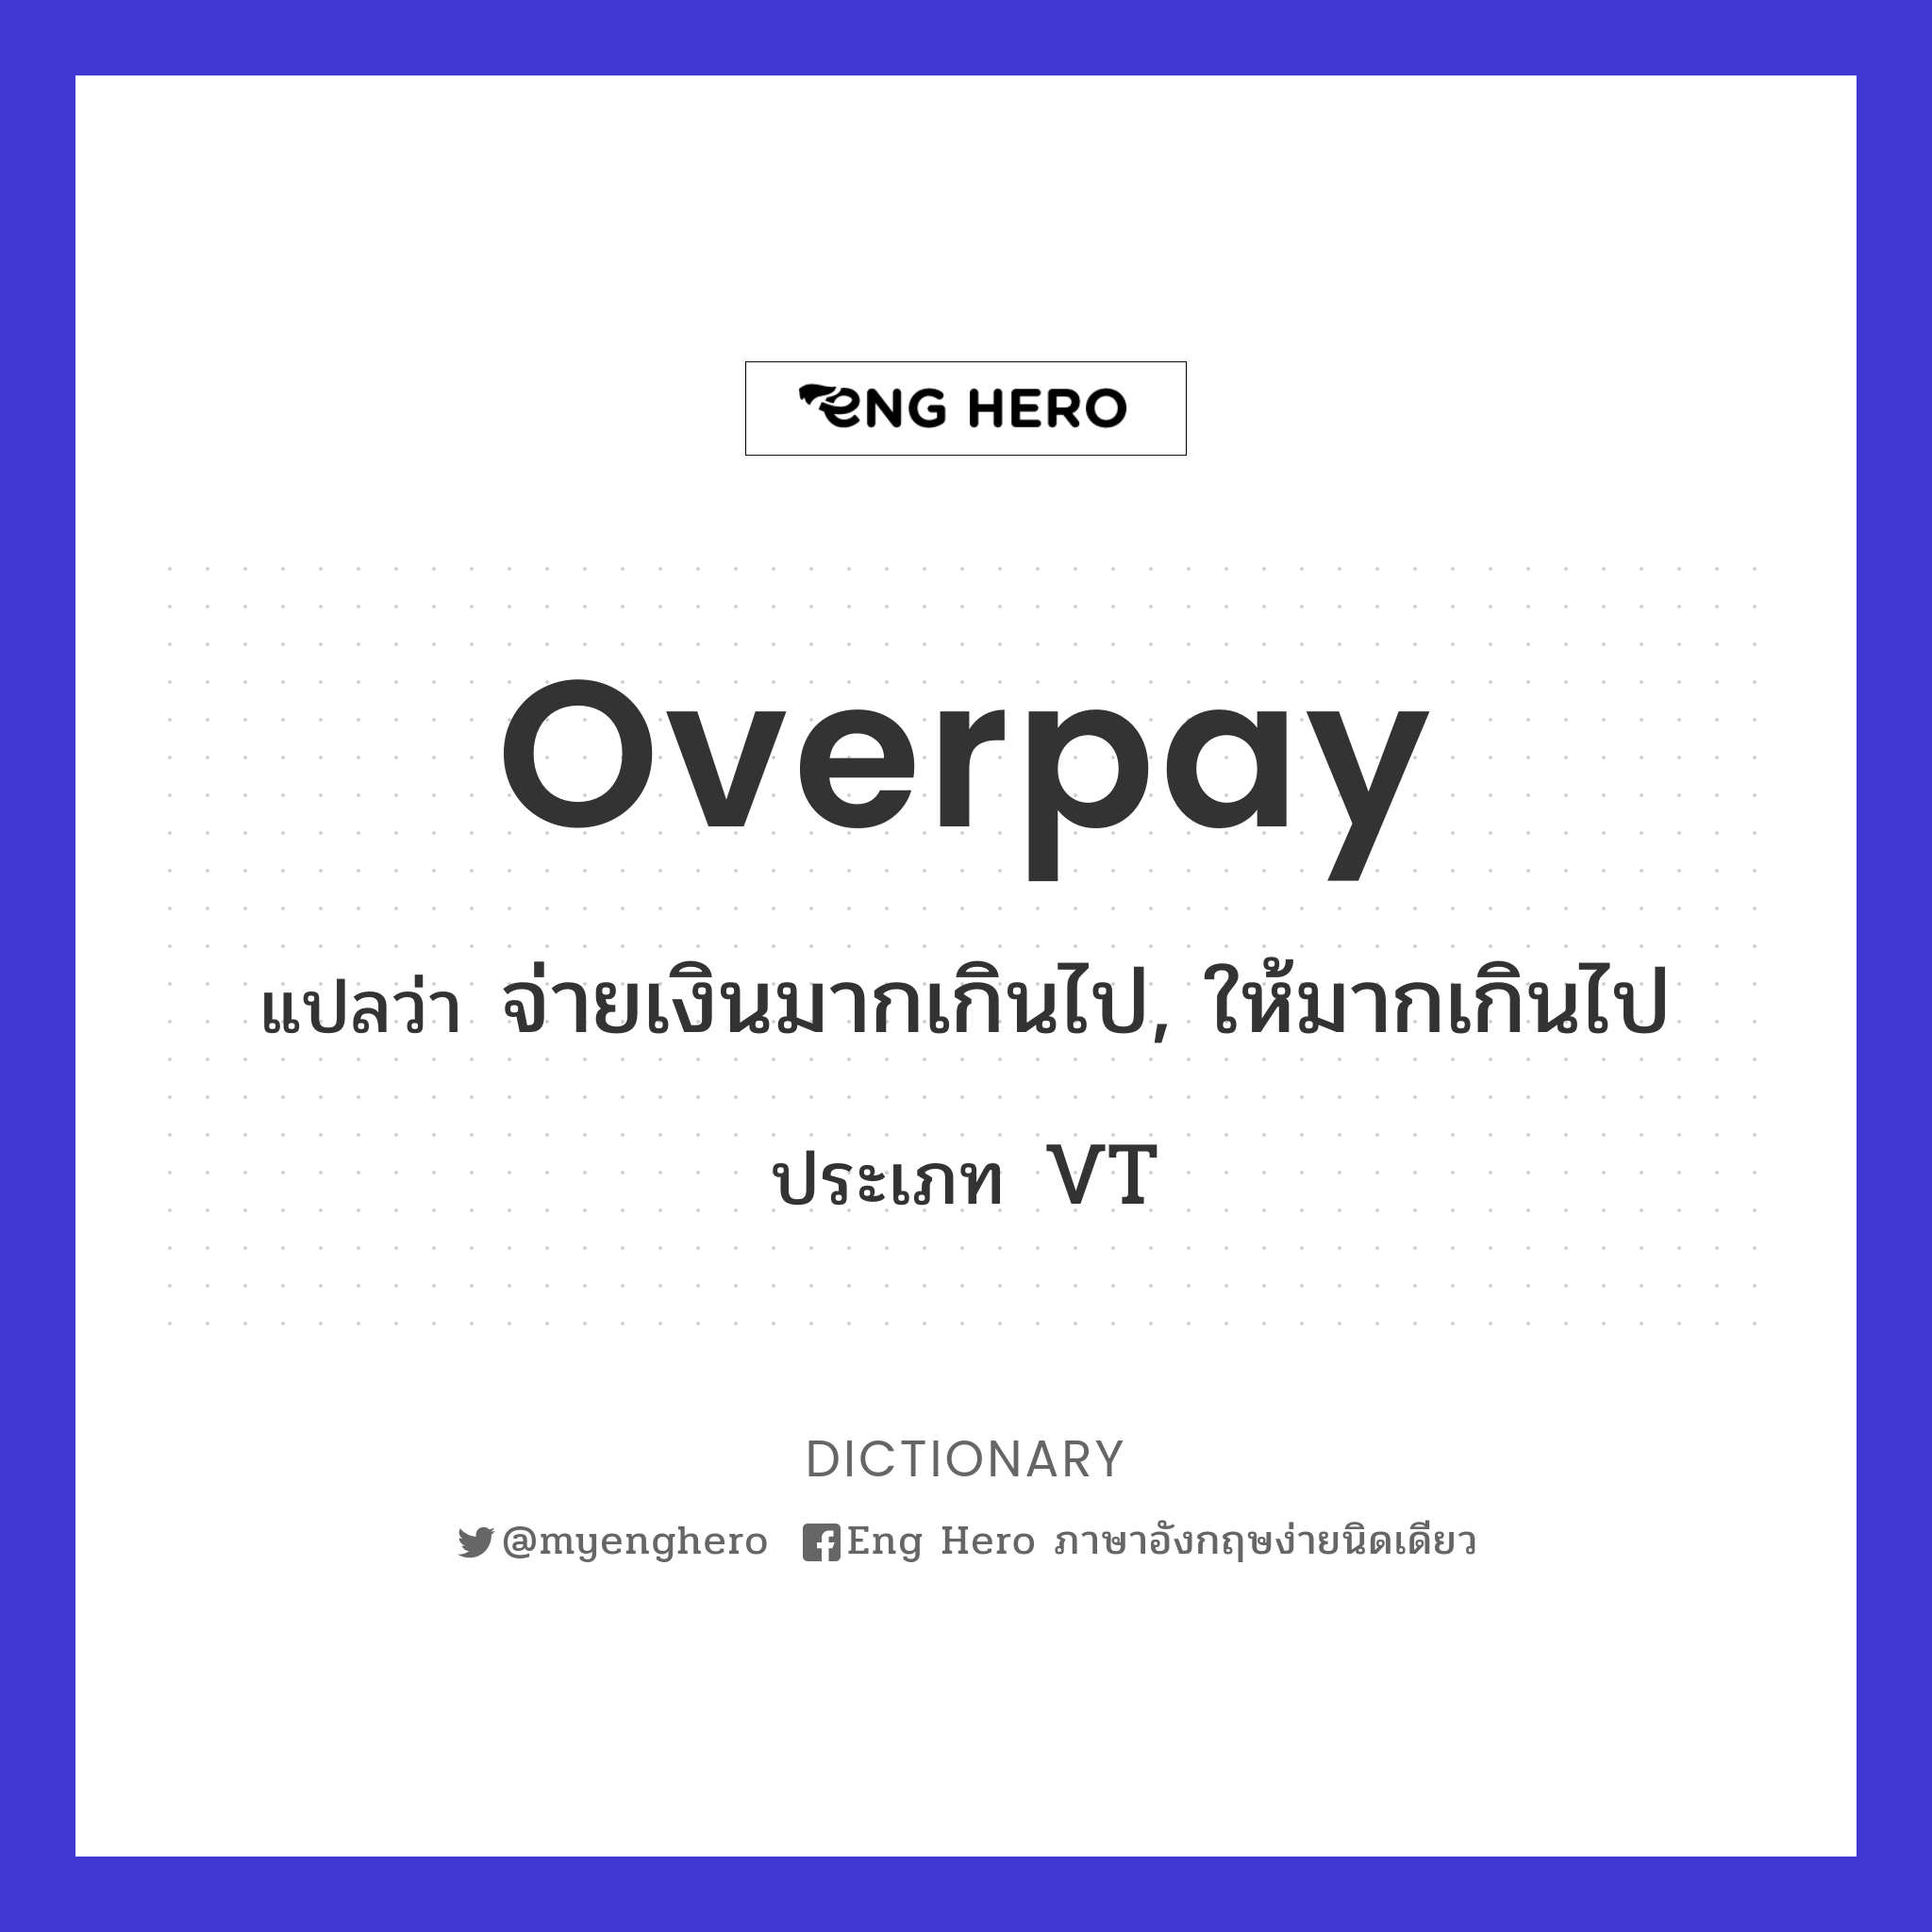 overpay